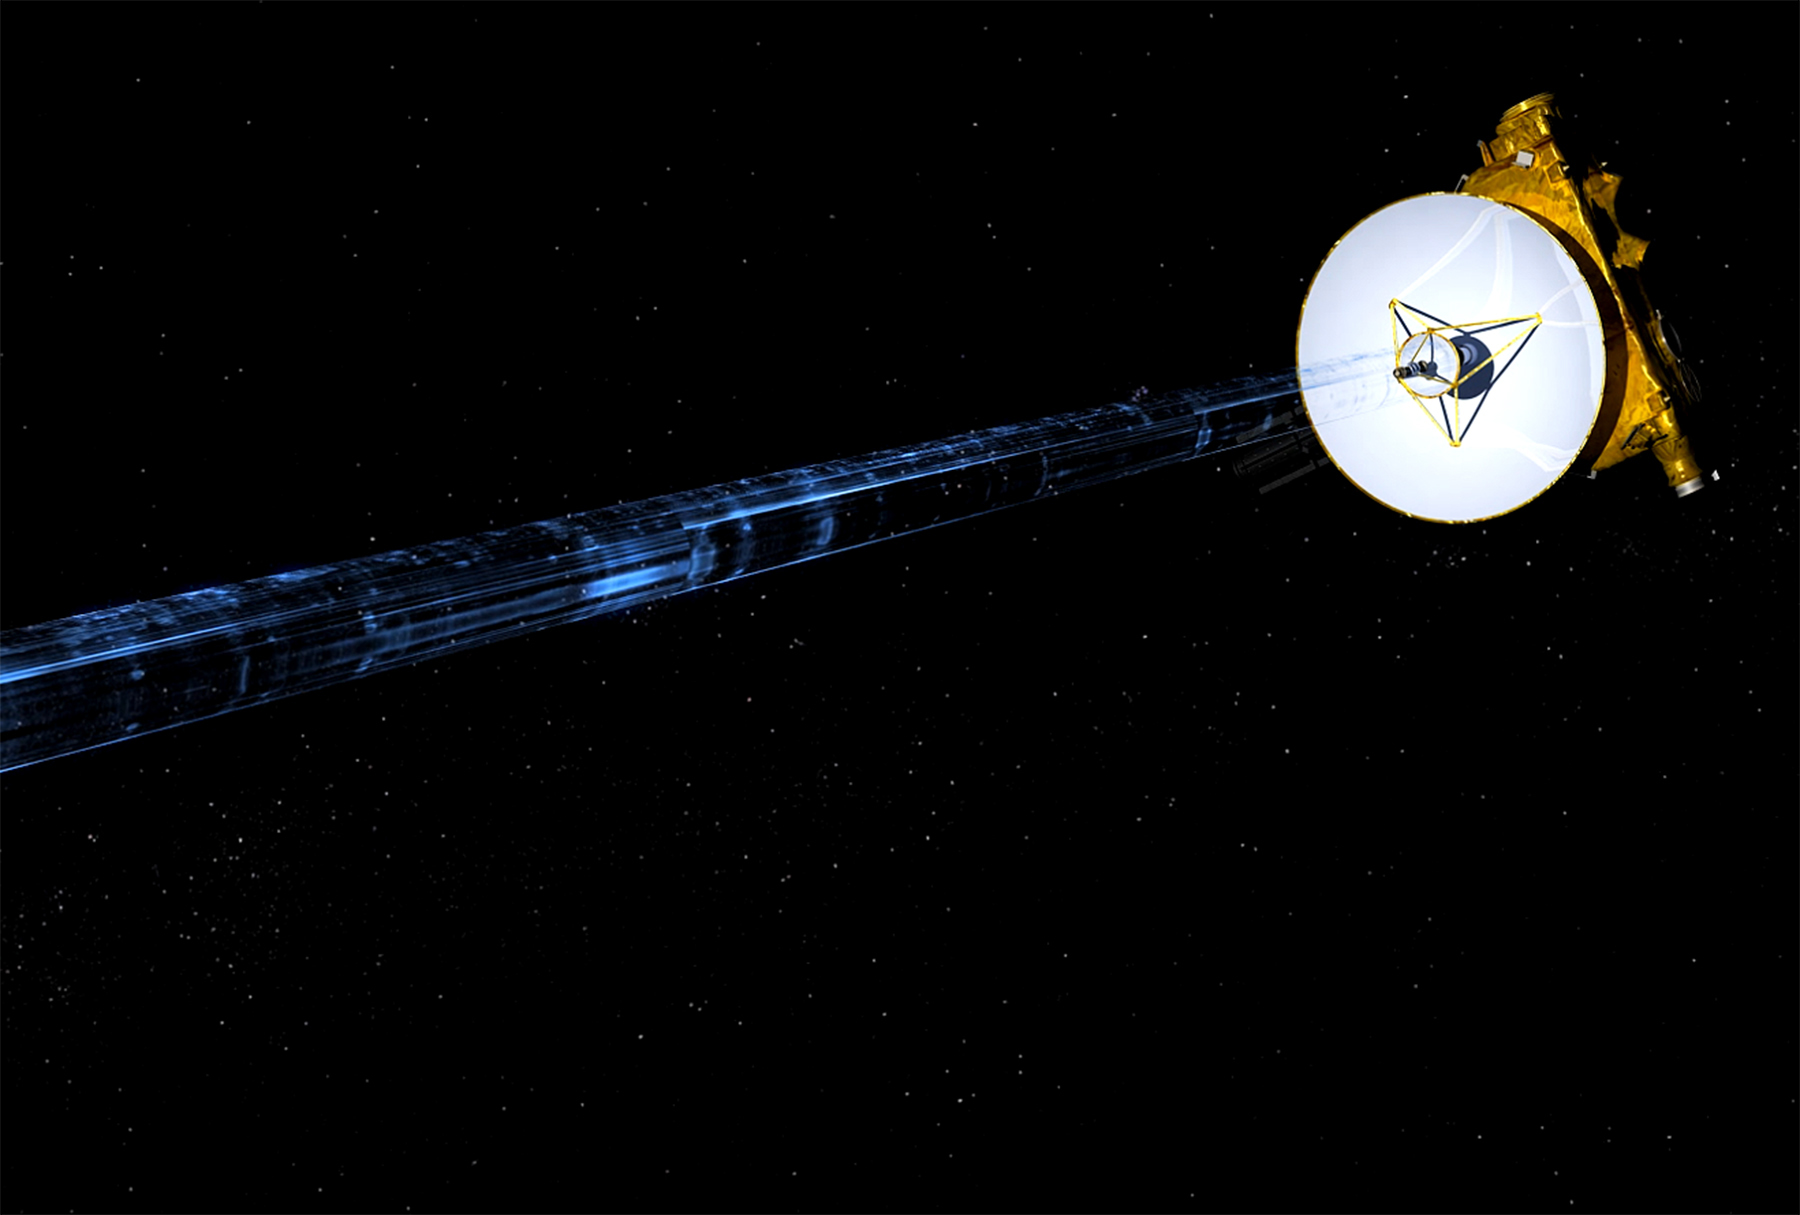 Artist’s illustration of the New Horizons spacecraft